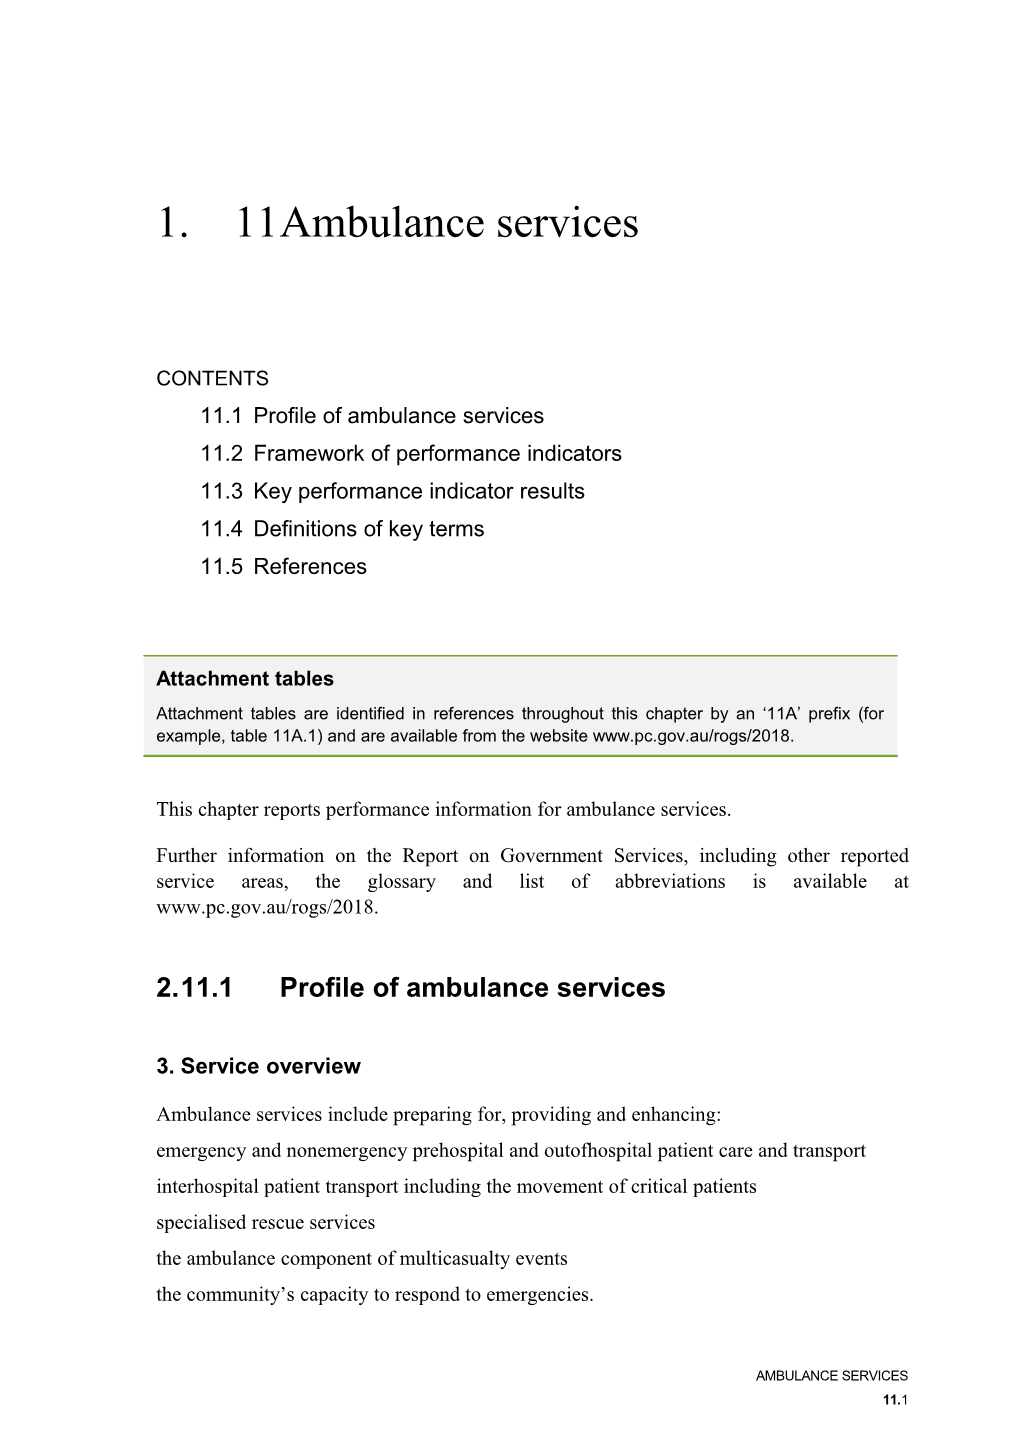 Chapter 11 Ambulance Services - Report on Government Services 2018